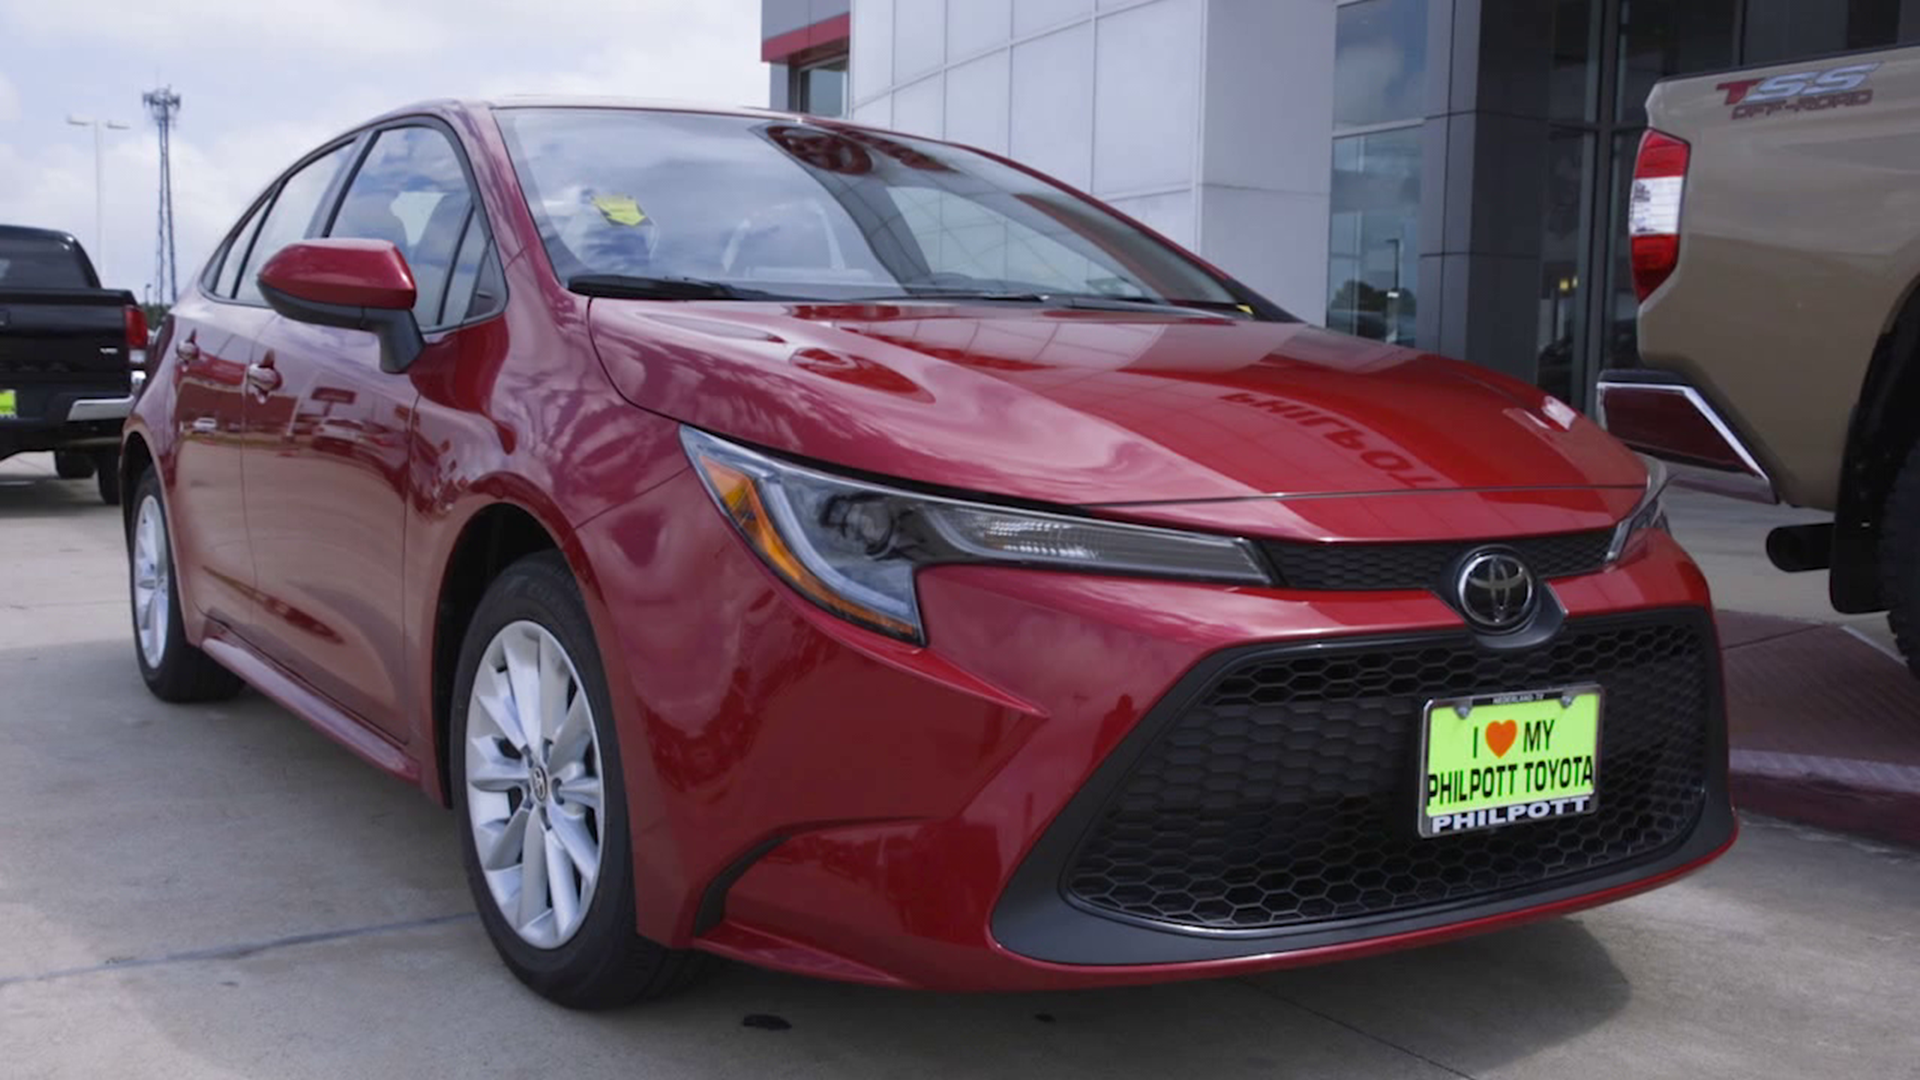 Today we're taking a 12News Test Drive in a brand new 2020 Toyota Corolla from Philpott Toyota in Nederland. Call (409) 853-3800 or visit PhilpottToyota.com to get yours!